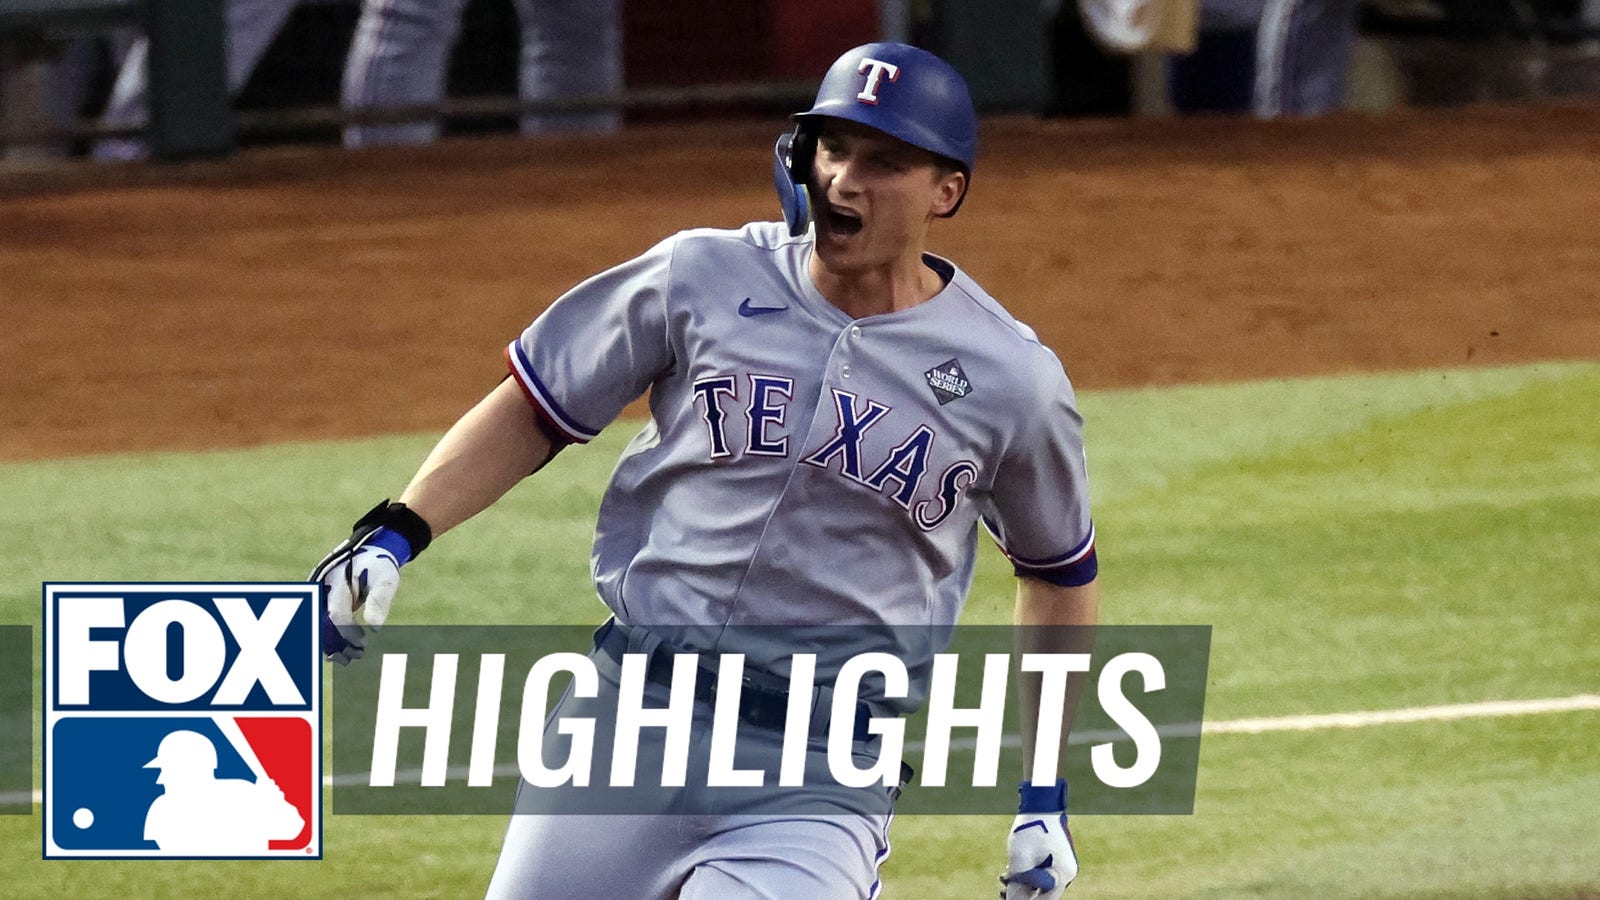 Marcus Semien's two-run triple and Corey Seager's two-run homer extend Rangers' lead vs. D-backs